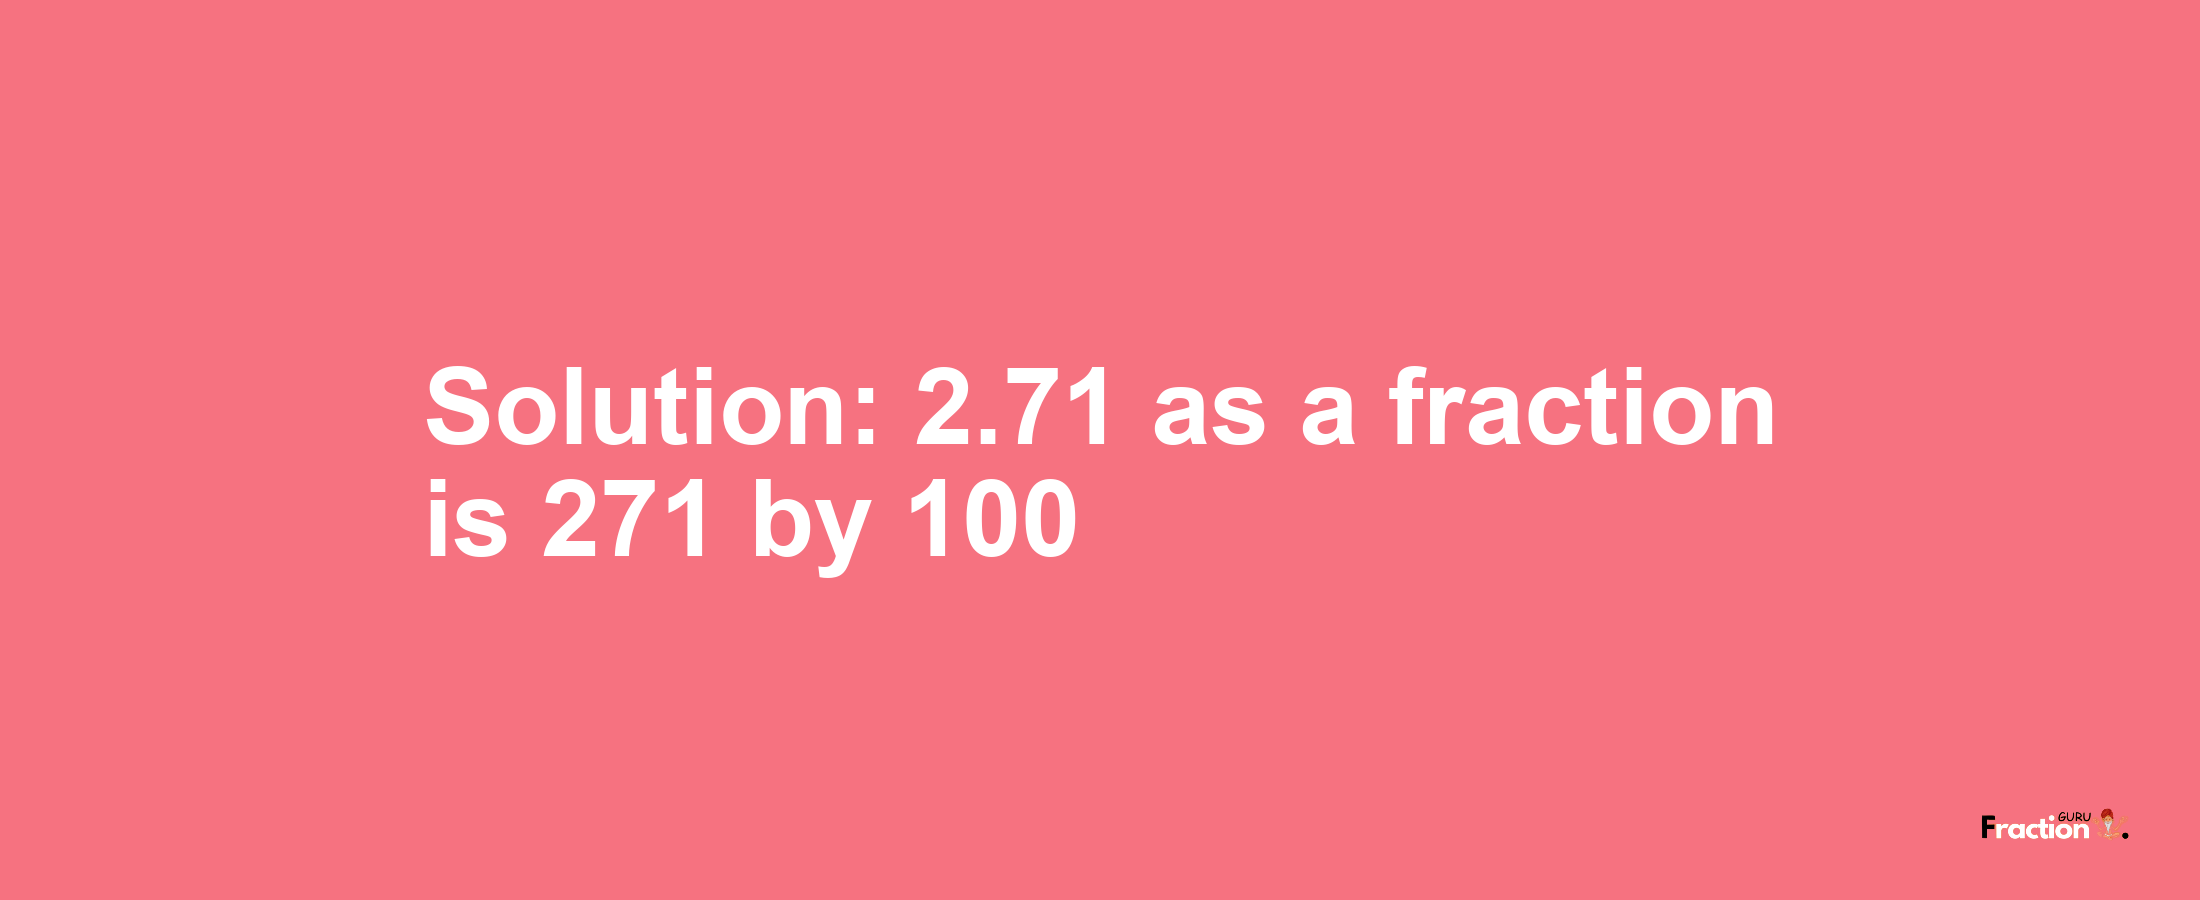 Solution:2.71 as a fraction is 271/100